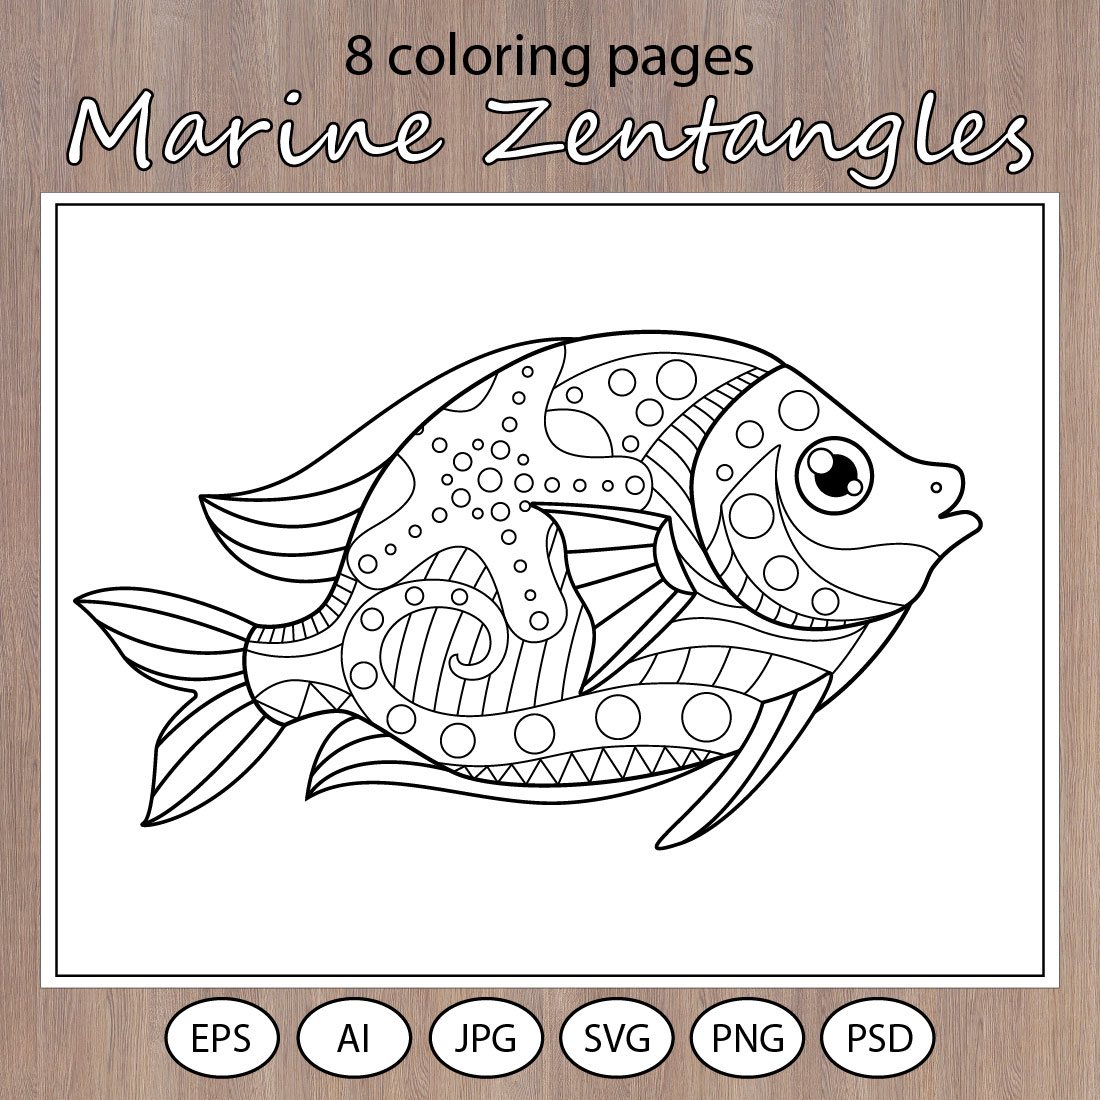 Marine Zentangles 8 coloring pages cover image.